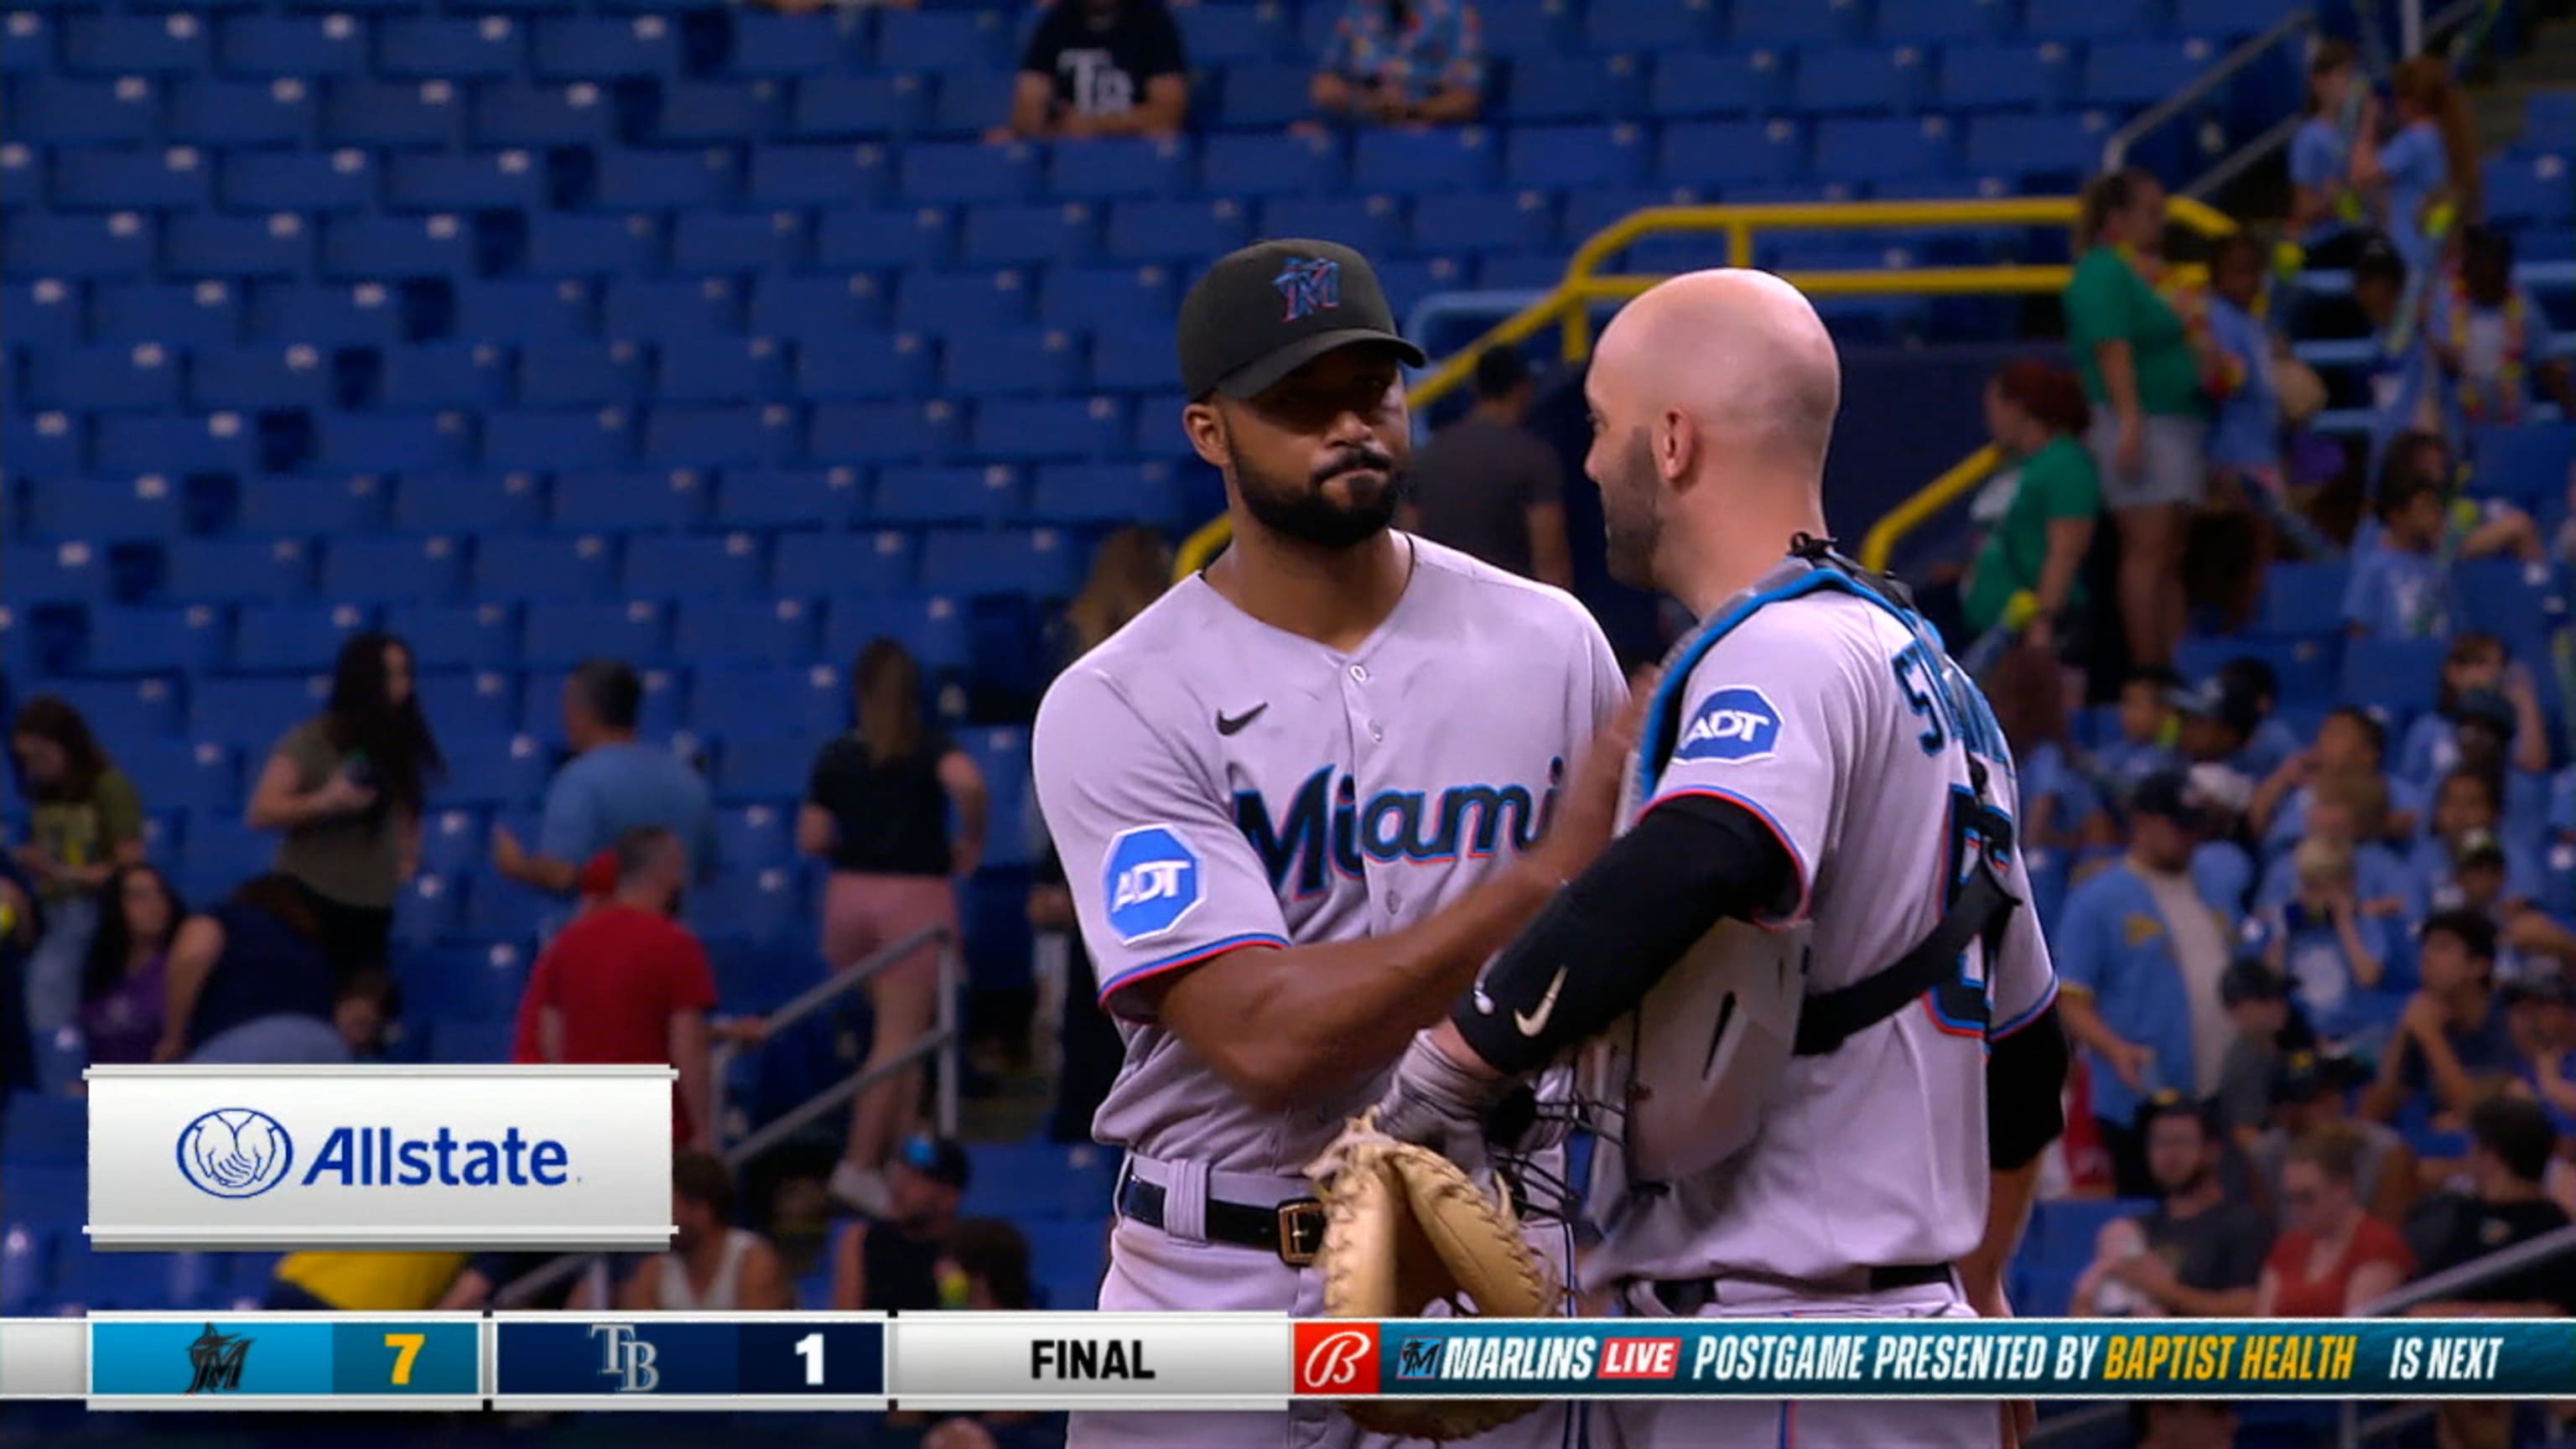 Alcantara blazes to his best start in months, topping Rays and ending  Marlins' 10-game road losing skid